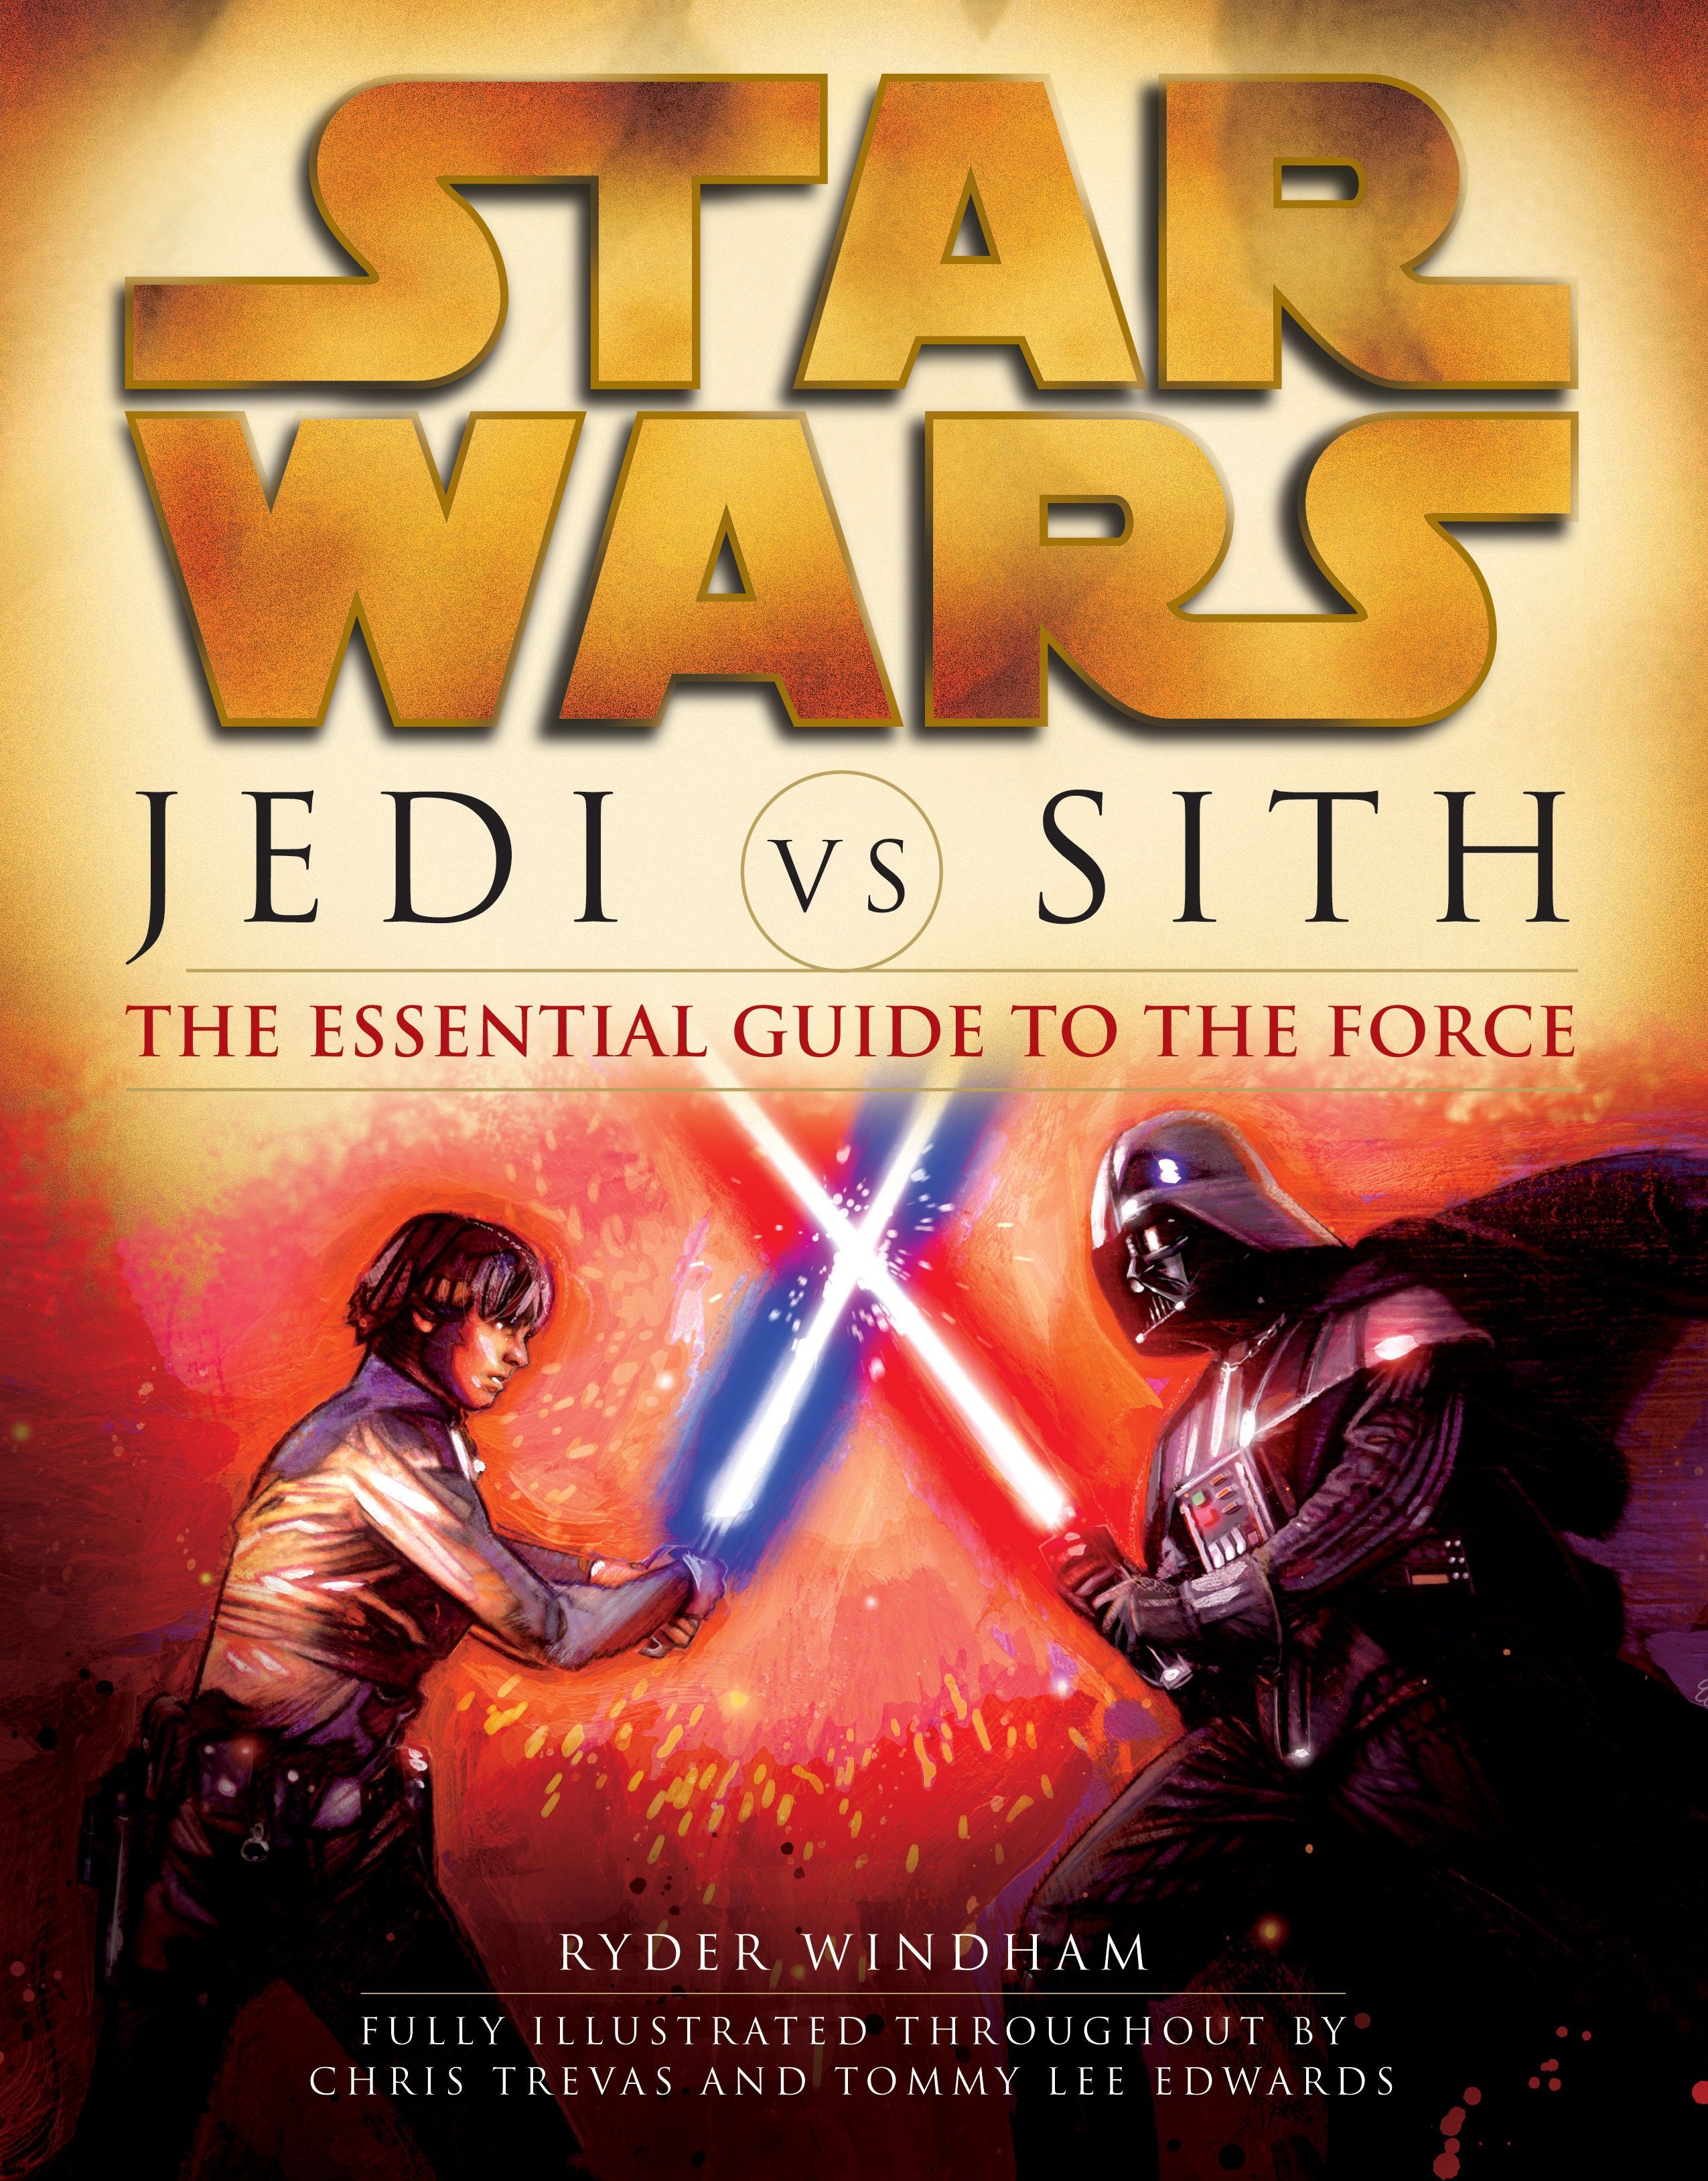 Jedi Vs. Sith: Star Wars The Essential Guide To The Force